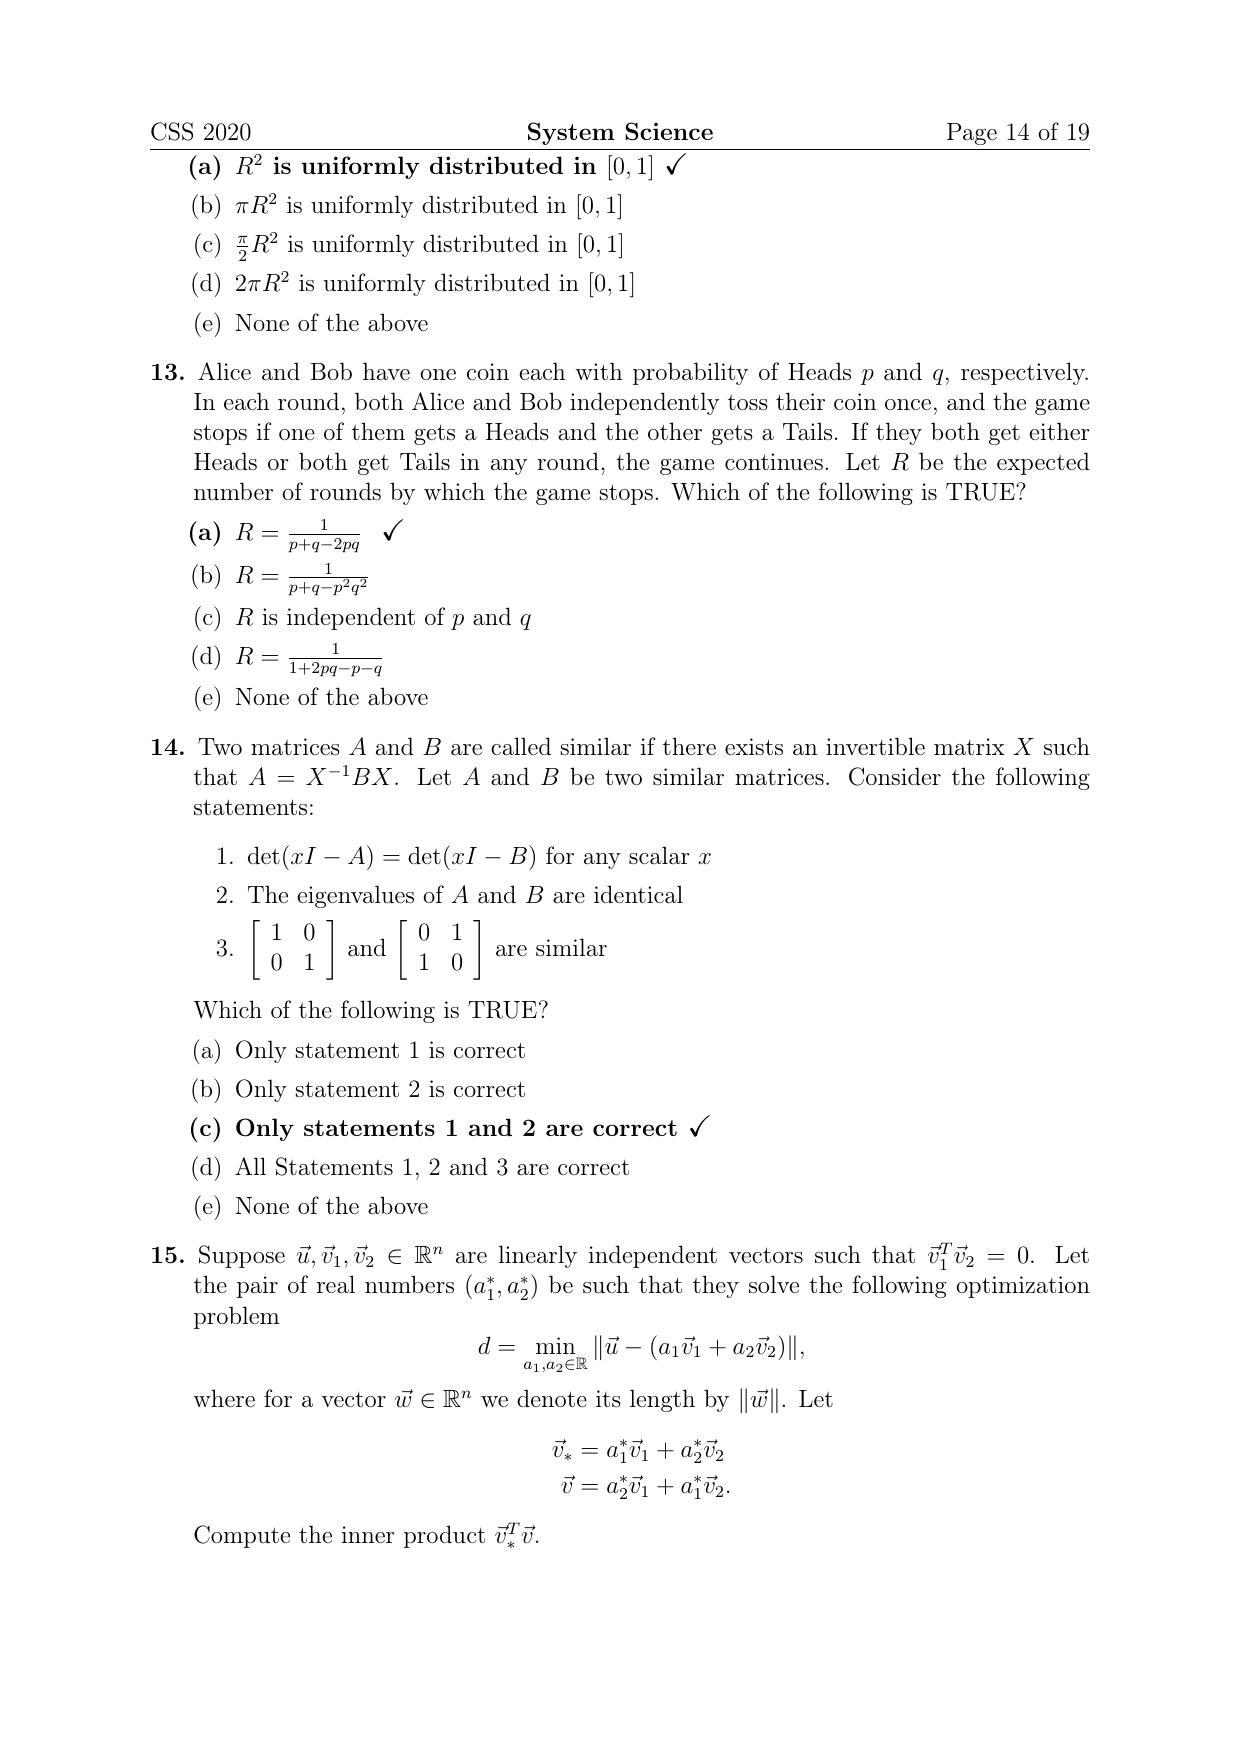 TIFR GS 2020 Computer & Systems Sciences Question Paper - Page 14